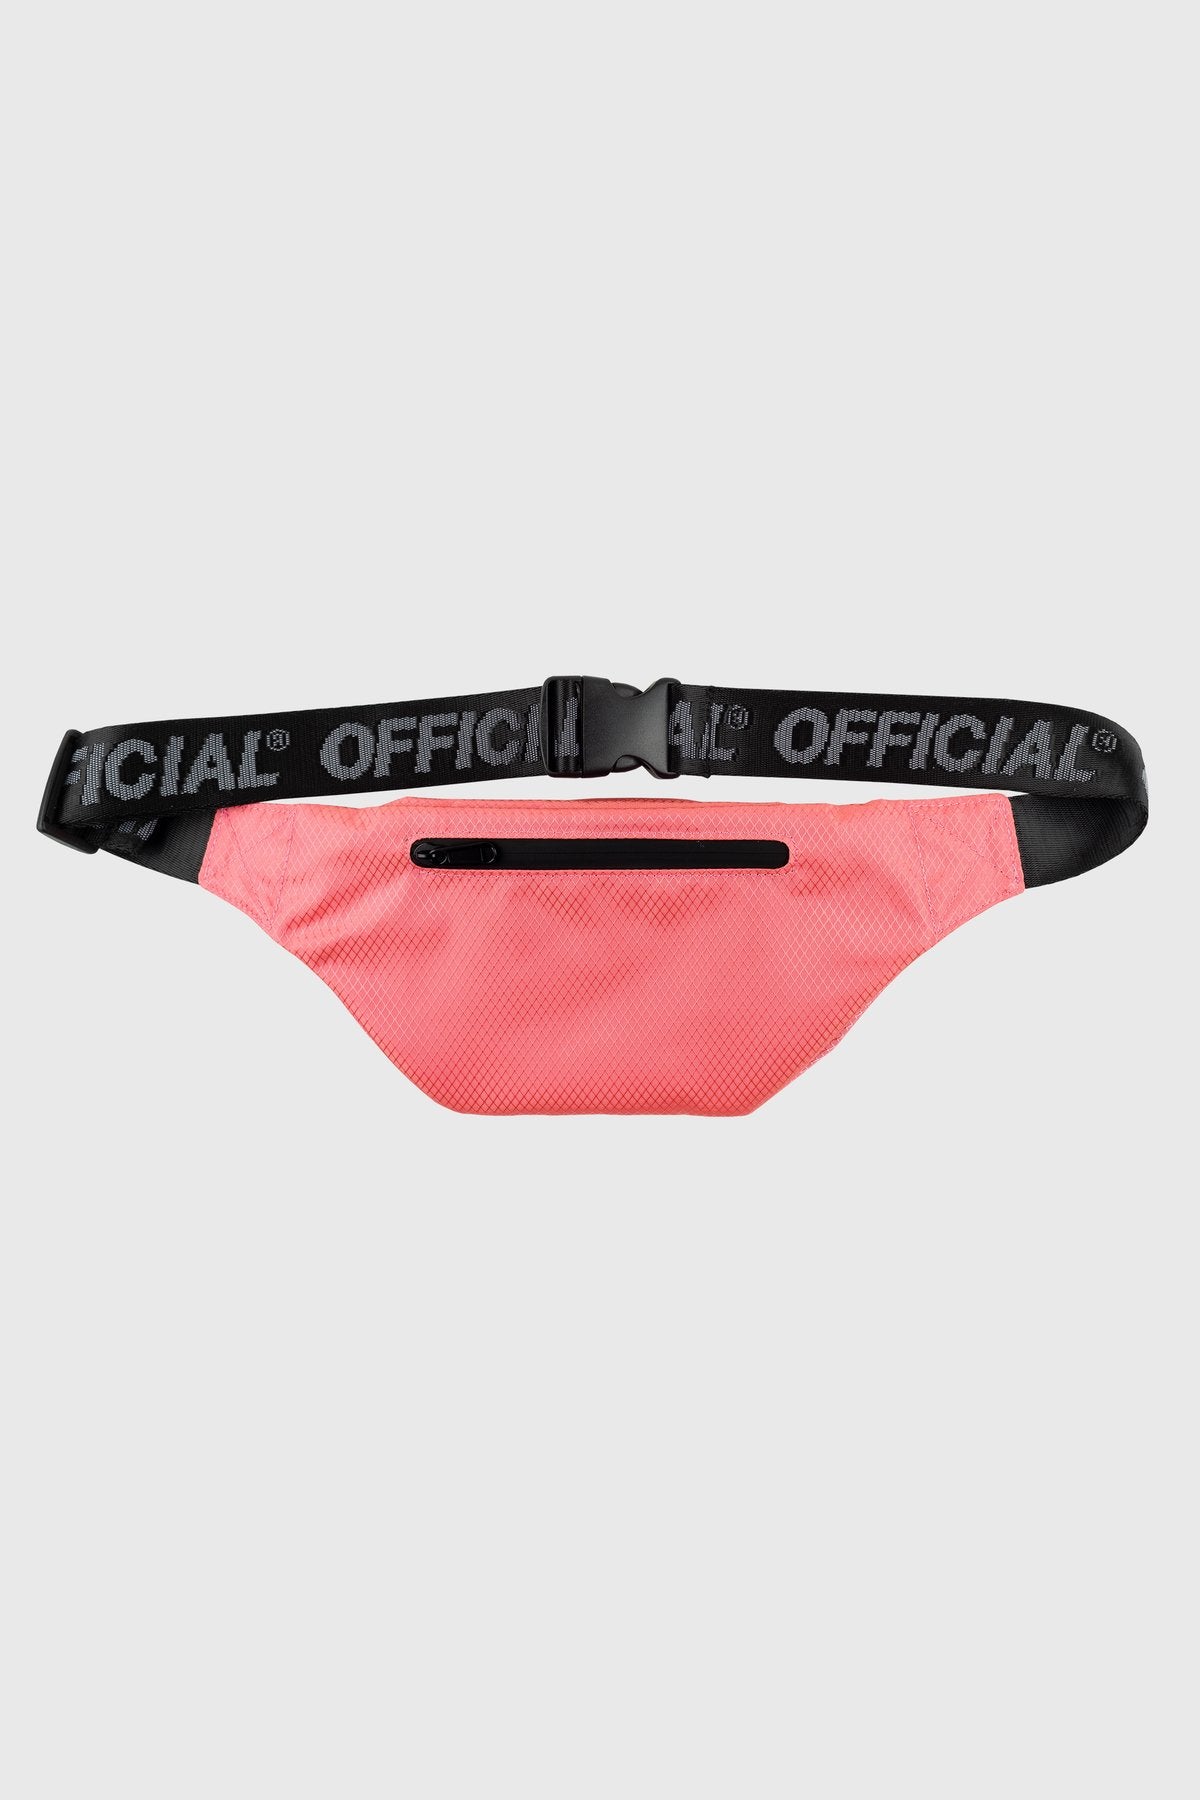 OFFICIAL Crossbody/Fanny Pack - Diamond Pink